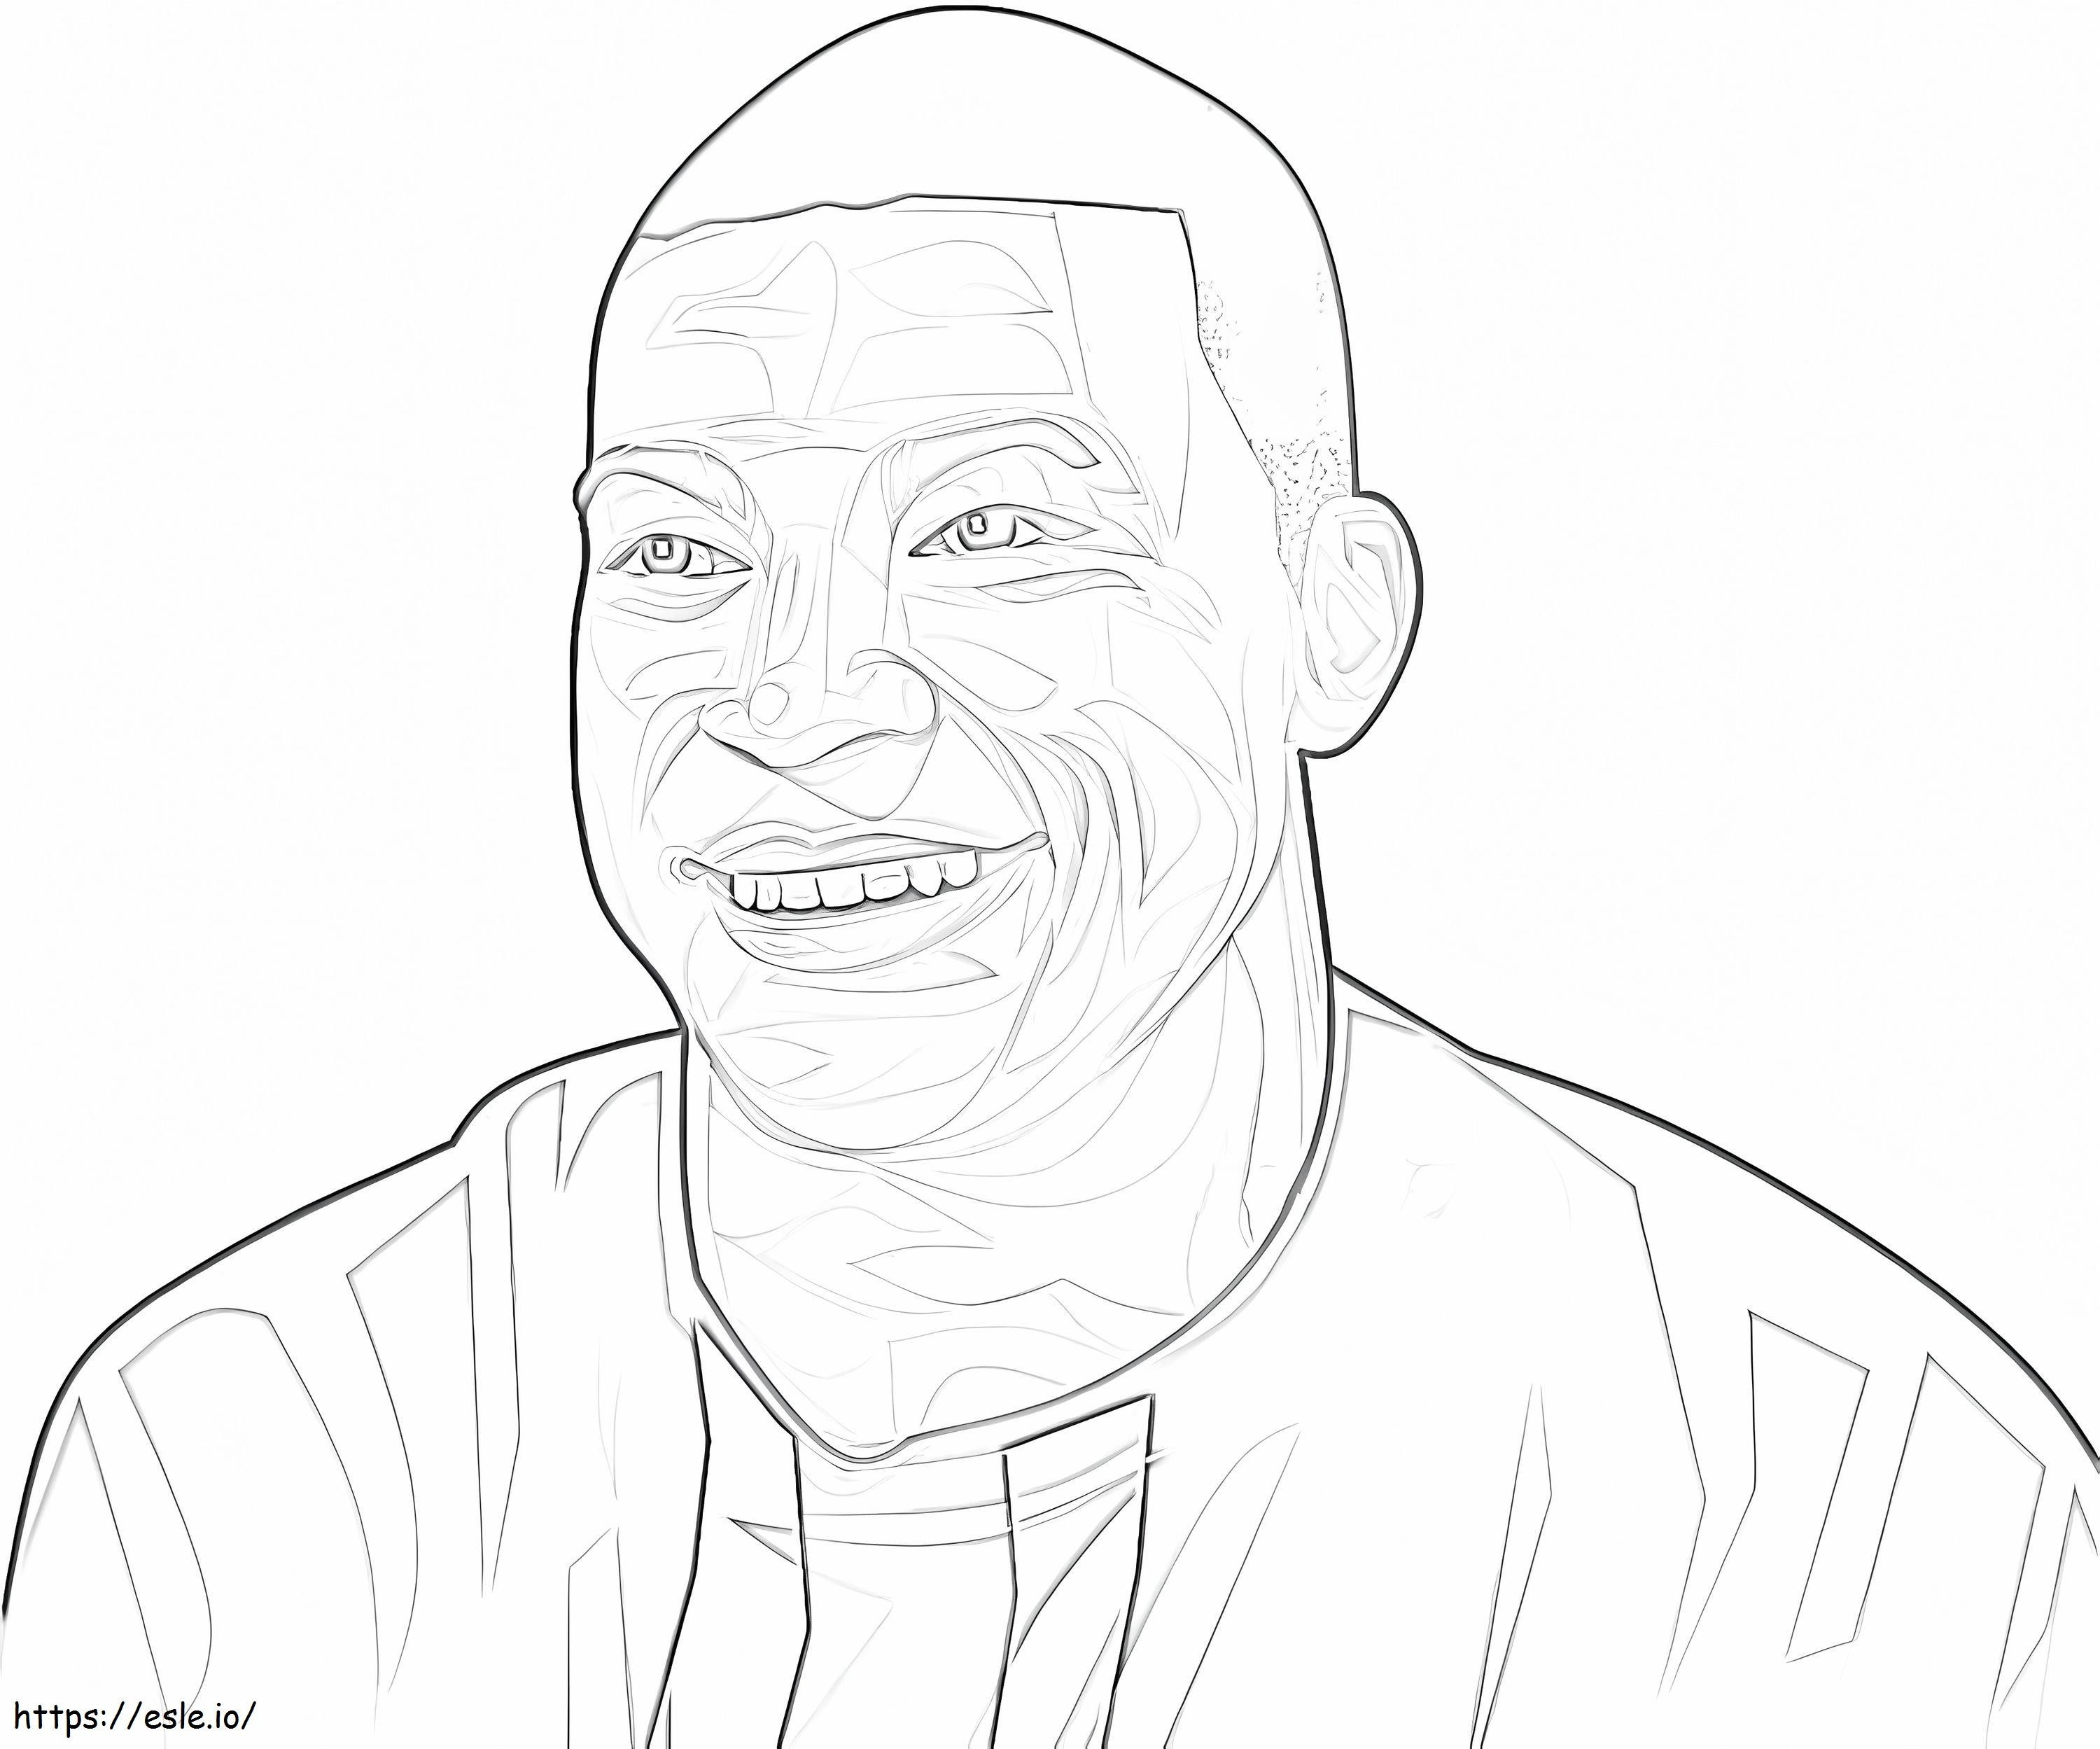 Kylian Mbappe 6 coloring page